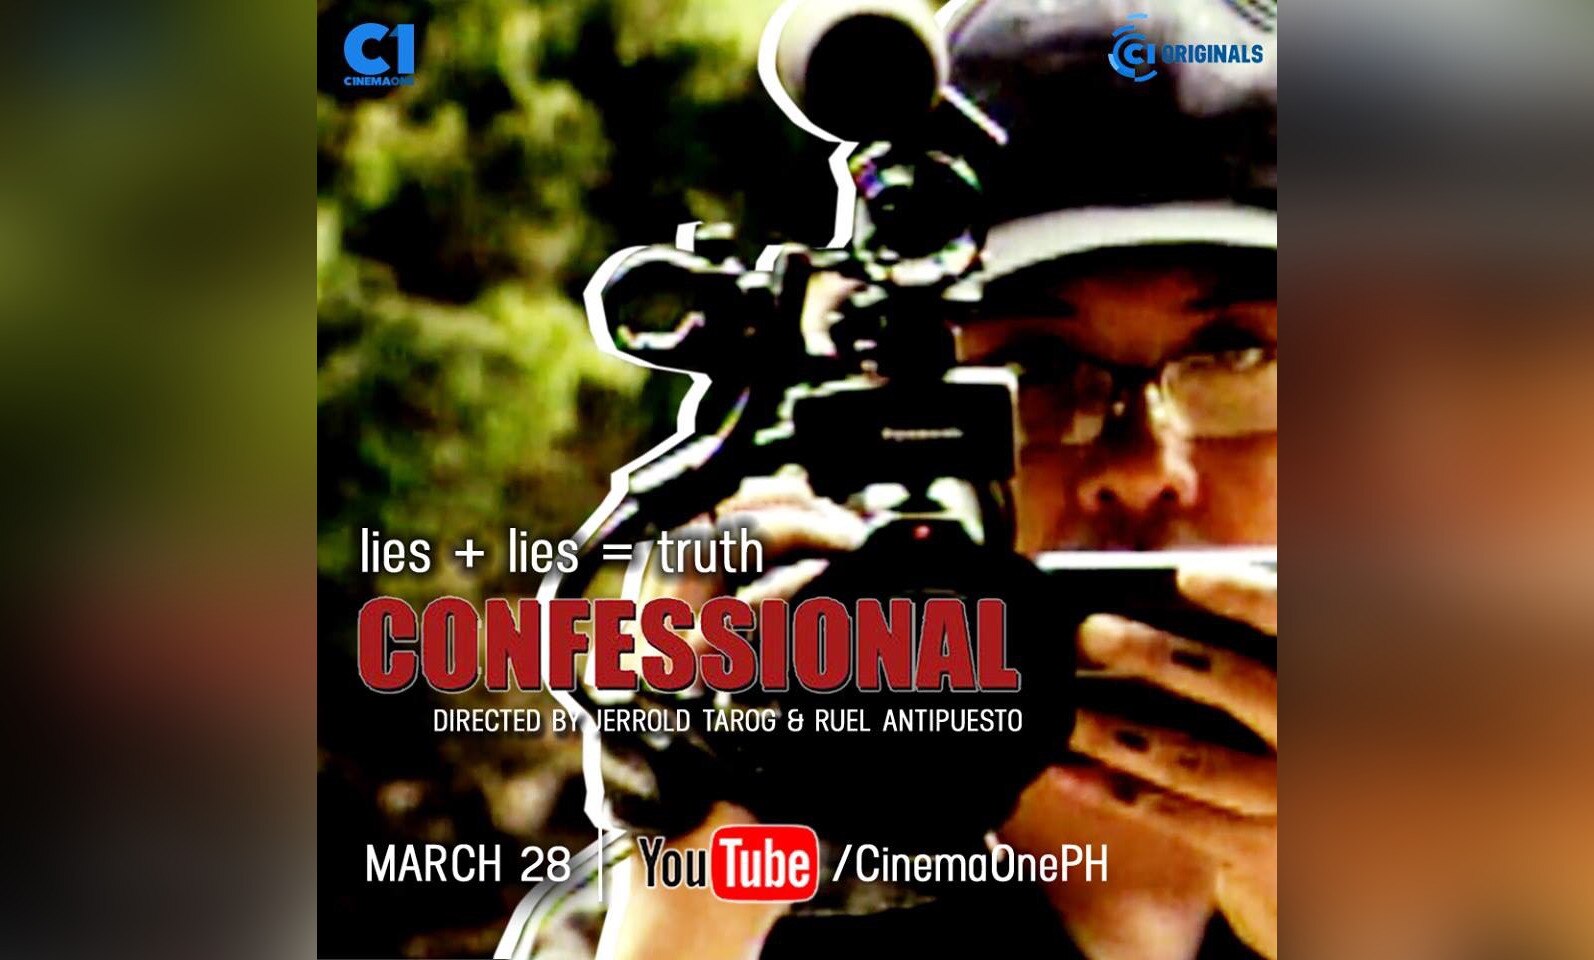 Political thriller "Confessional" streams on YouTube